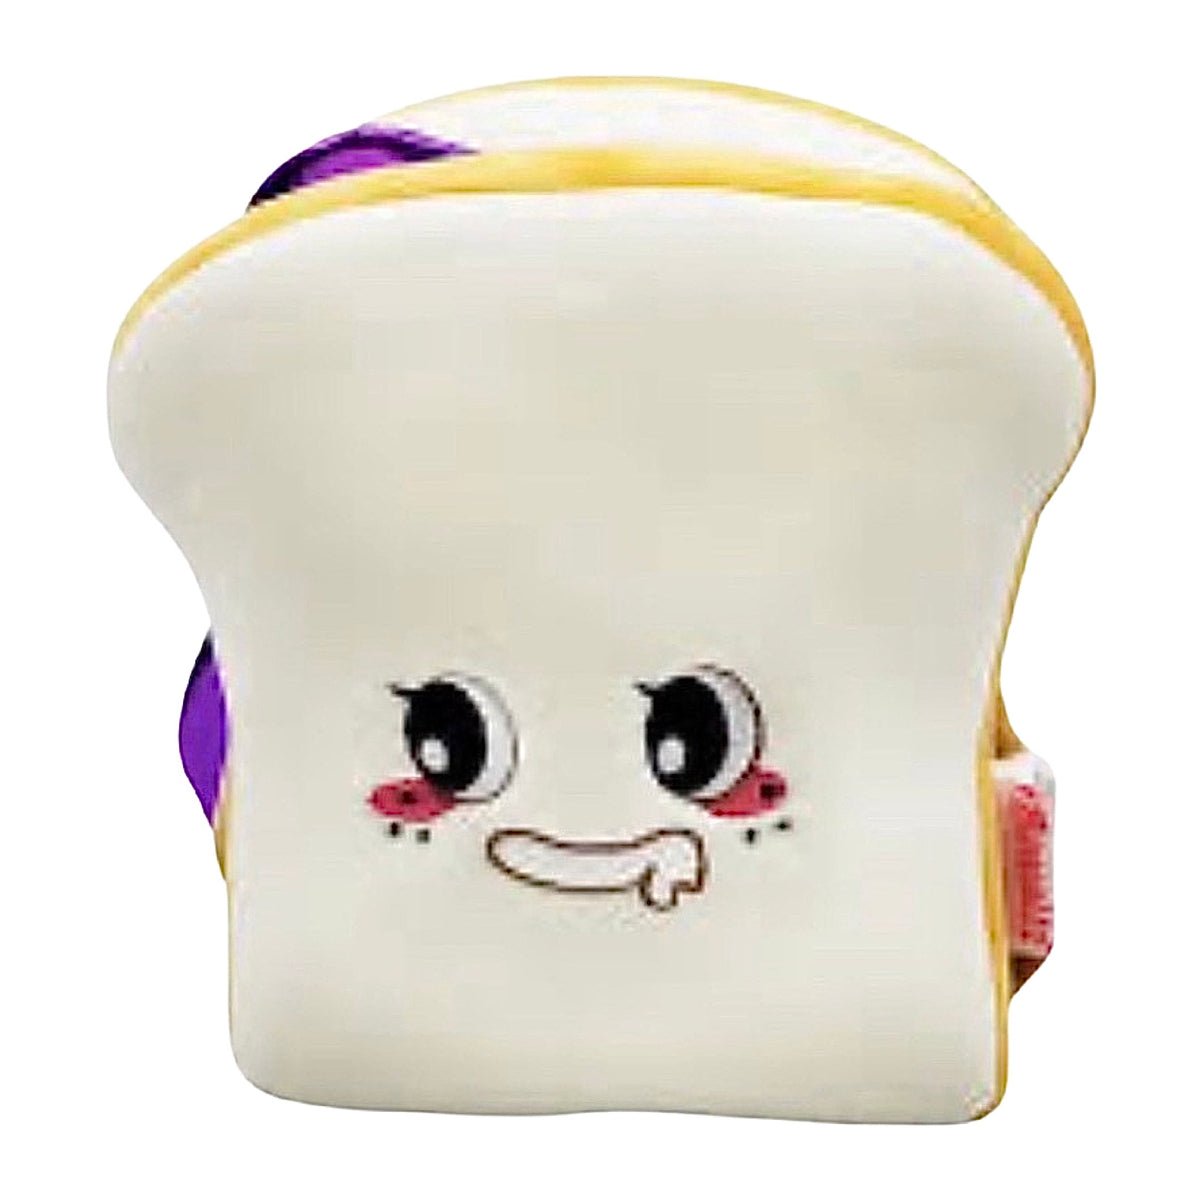 Bewaltz 8" Peanut Butter and Jelly Sandwich BFF Plush  - Two Sides Velcro Together